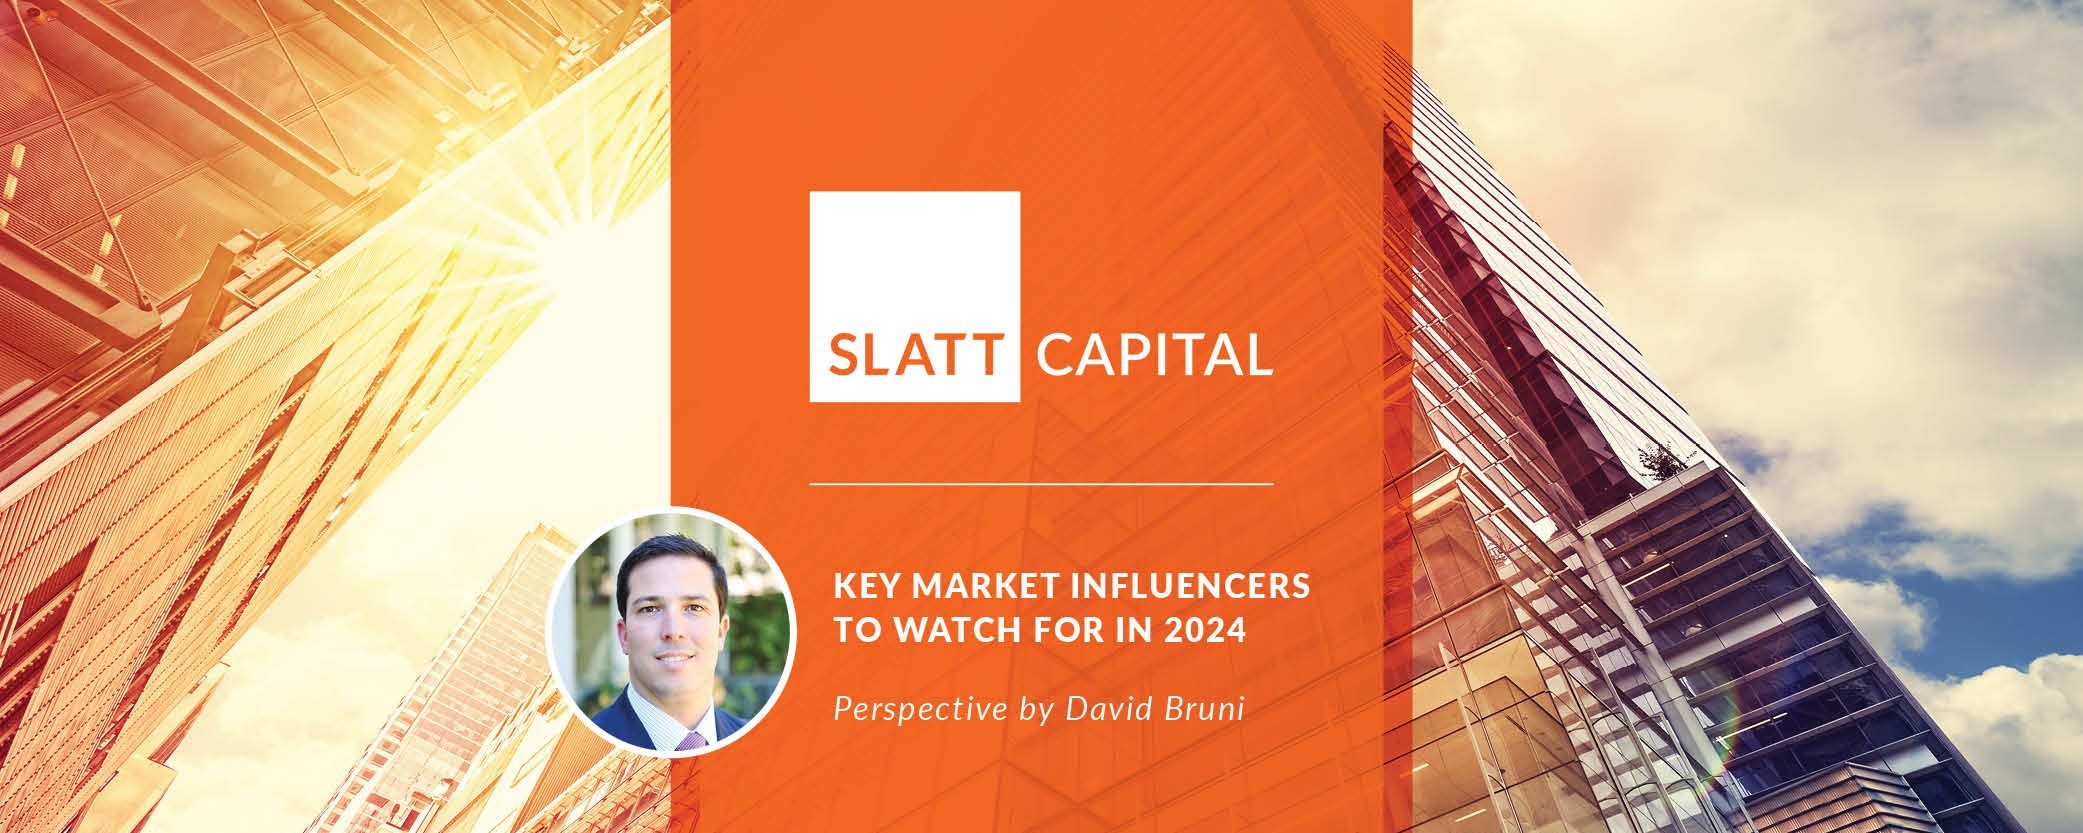 Key market influences to watch for in 2024